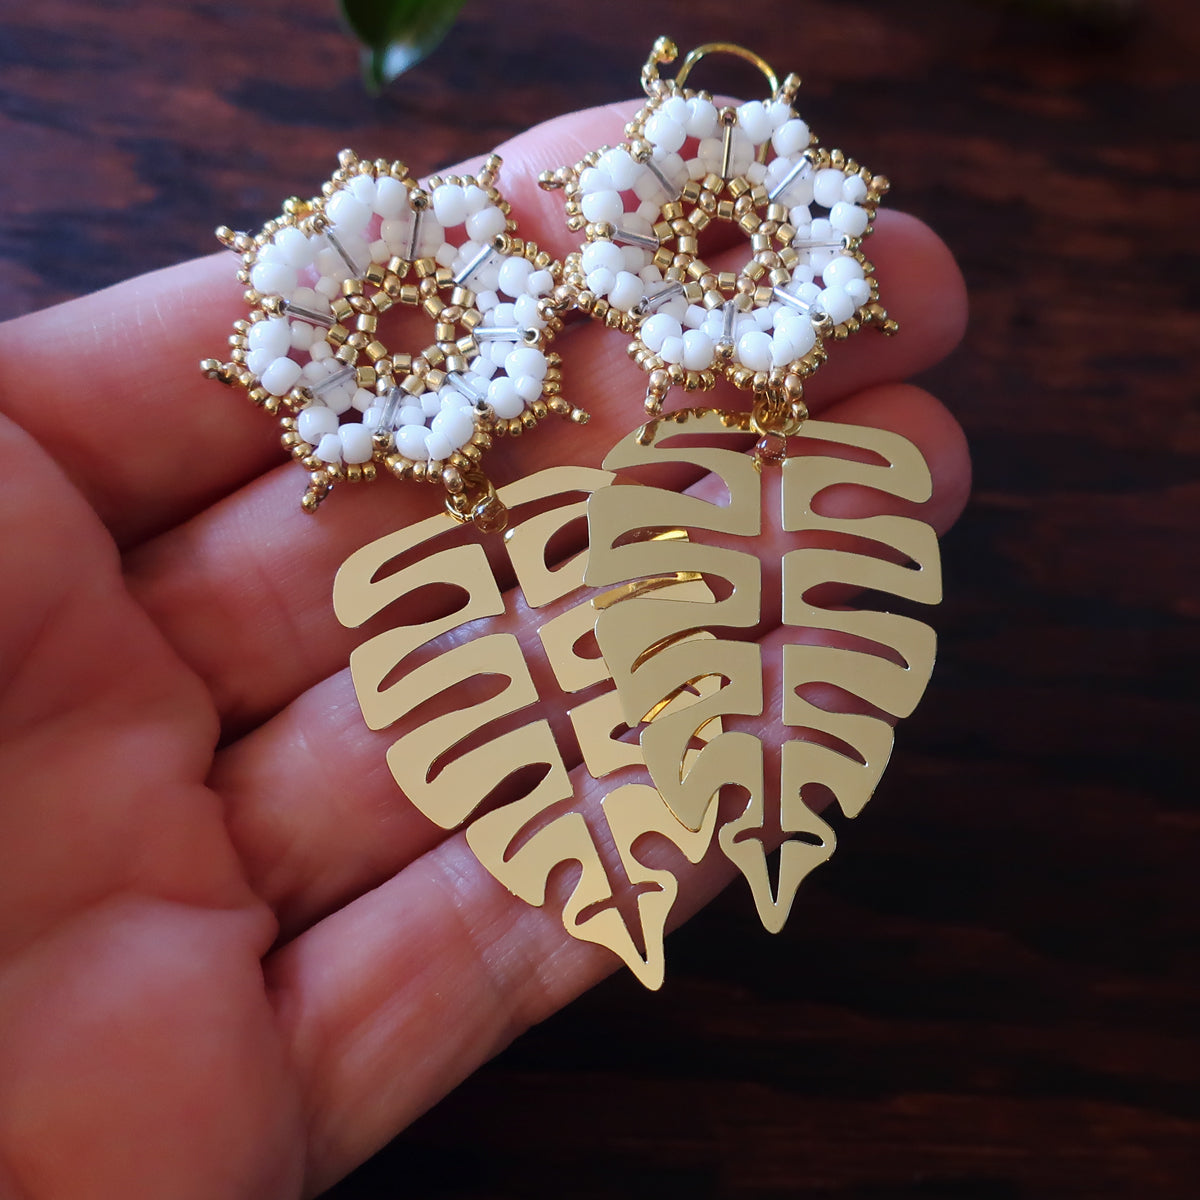 Temple Tree Dharma Wheel Earrings with Monstera - White and Gold